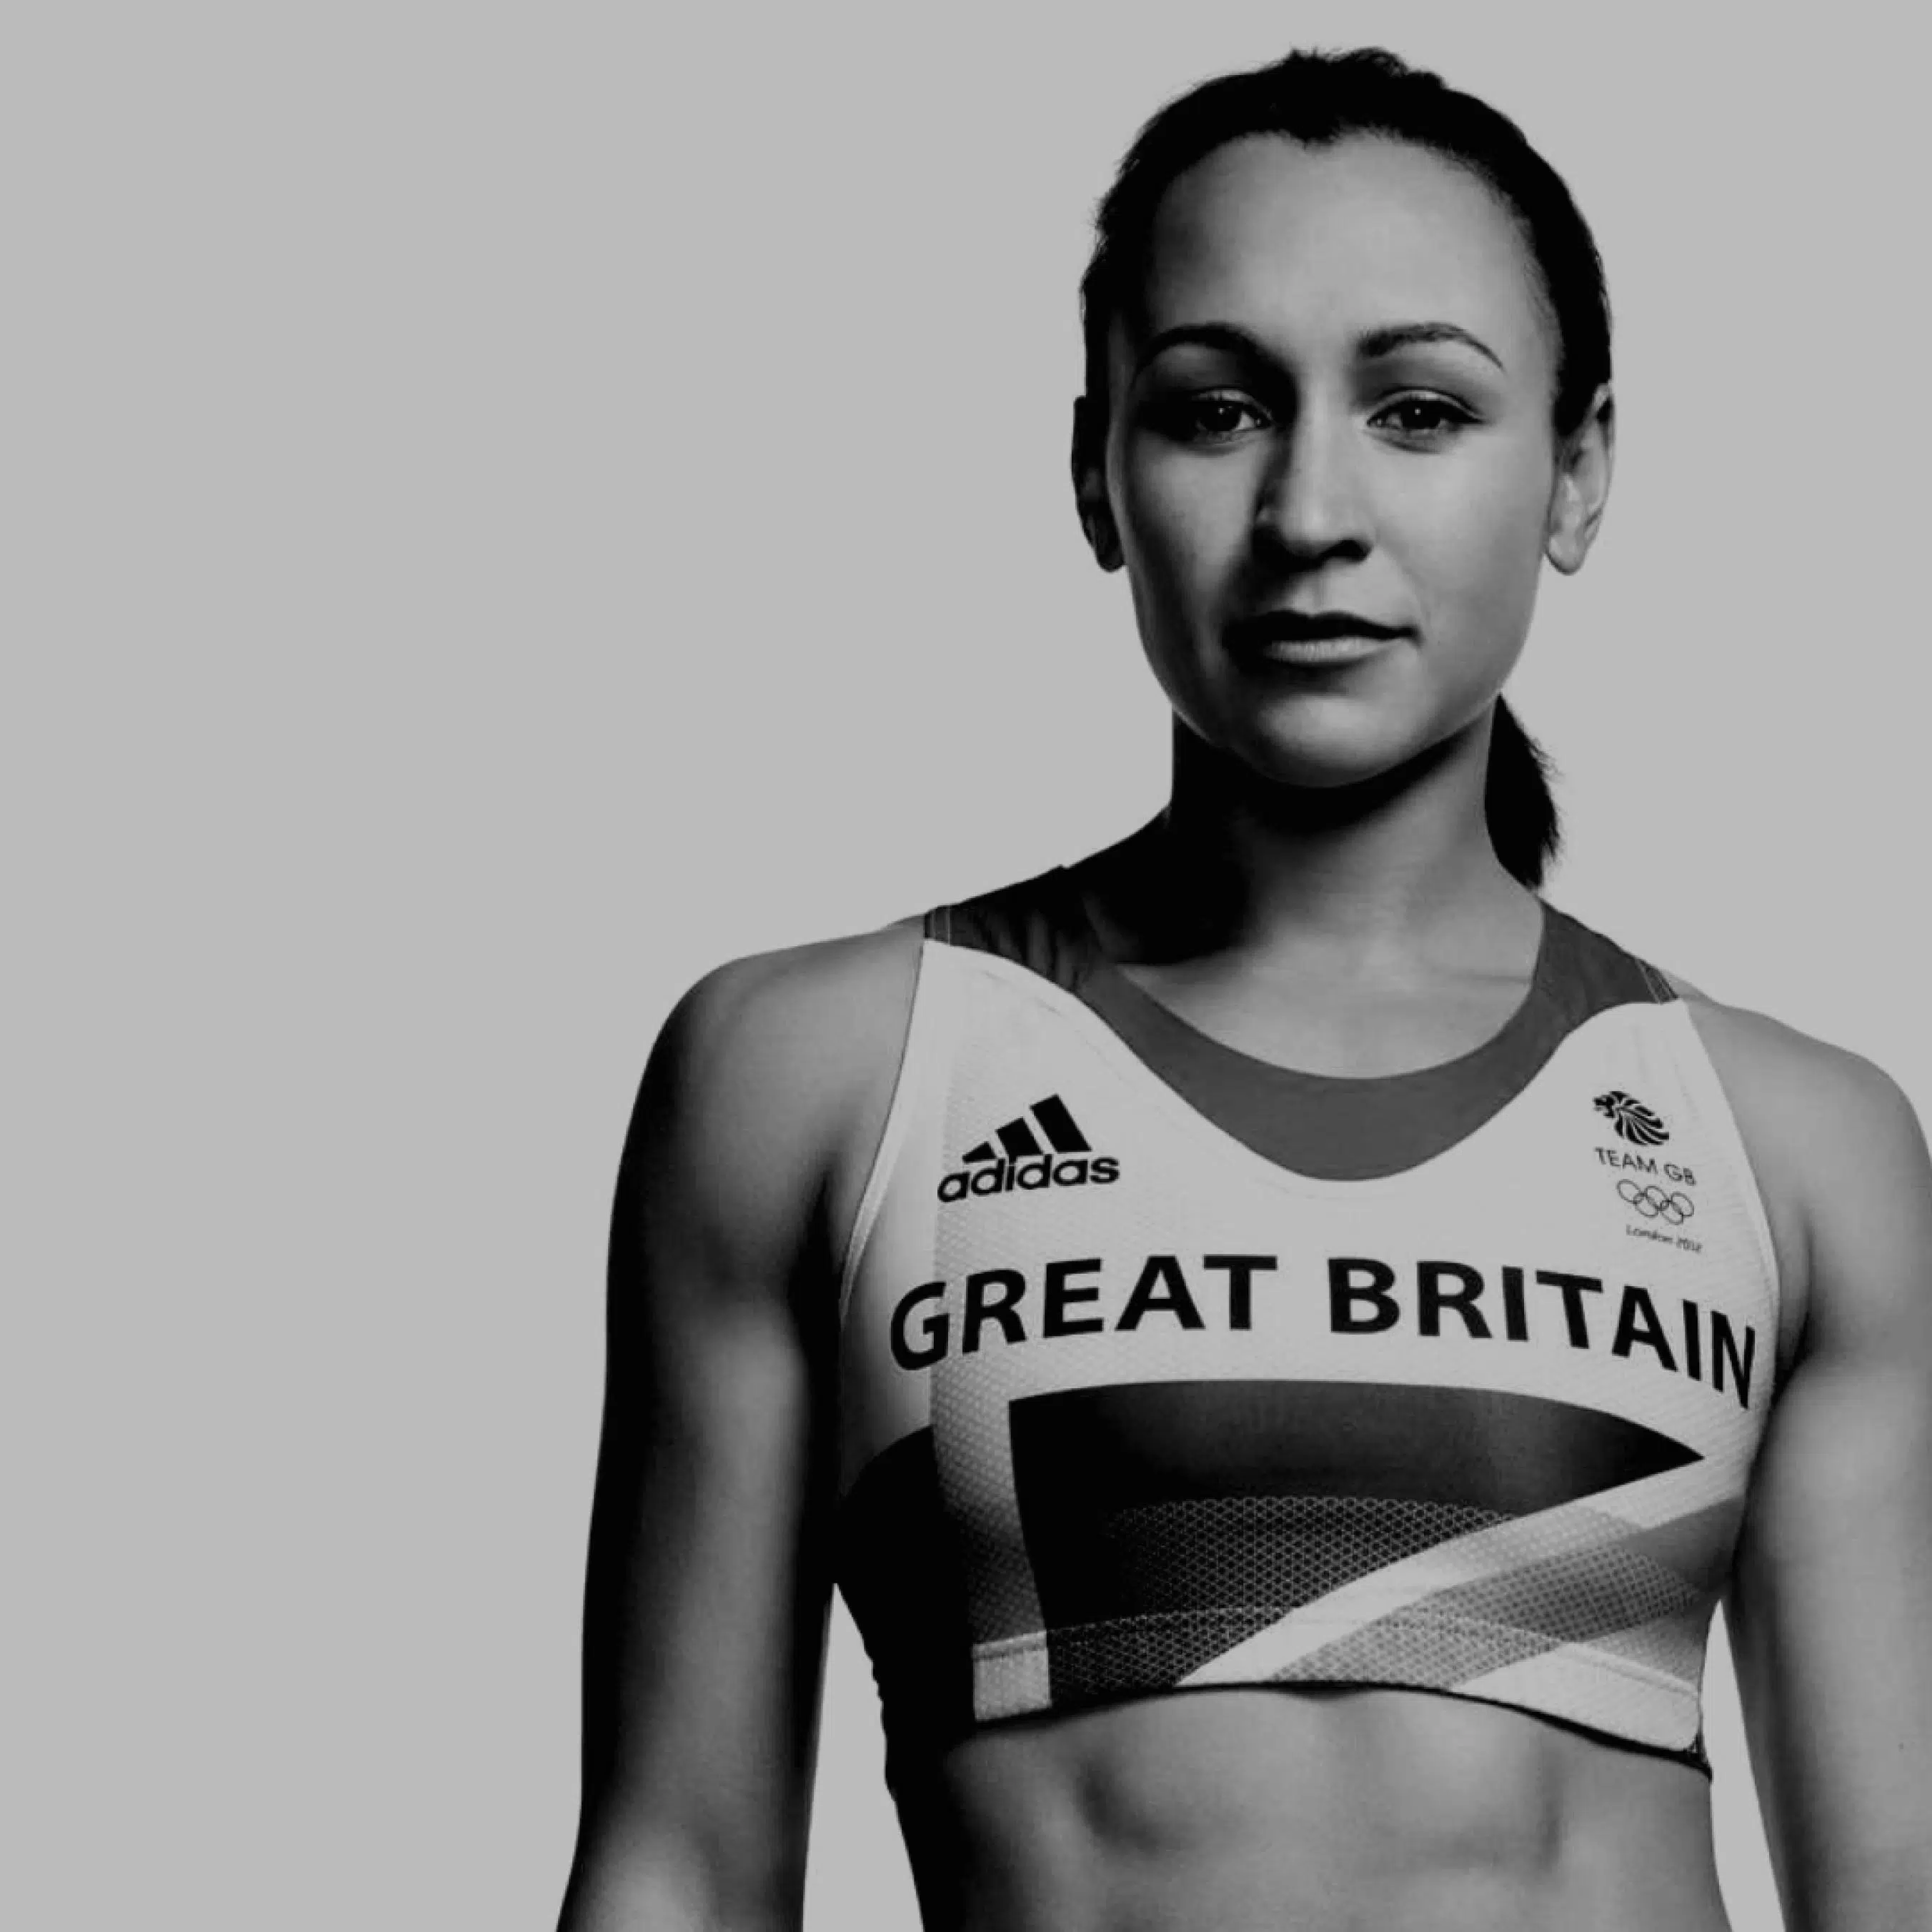 Endless Vital Activity: conversations to inspire radical action. David Johnston sat down with Jessica Ennis-Hill to unpack and Rethink Women’s Health.